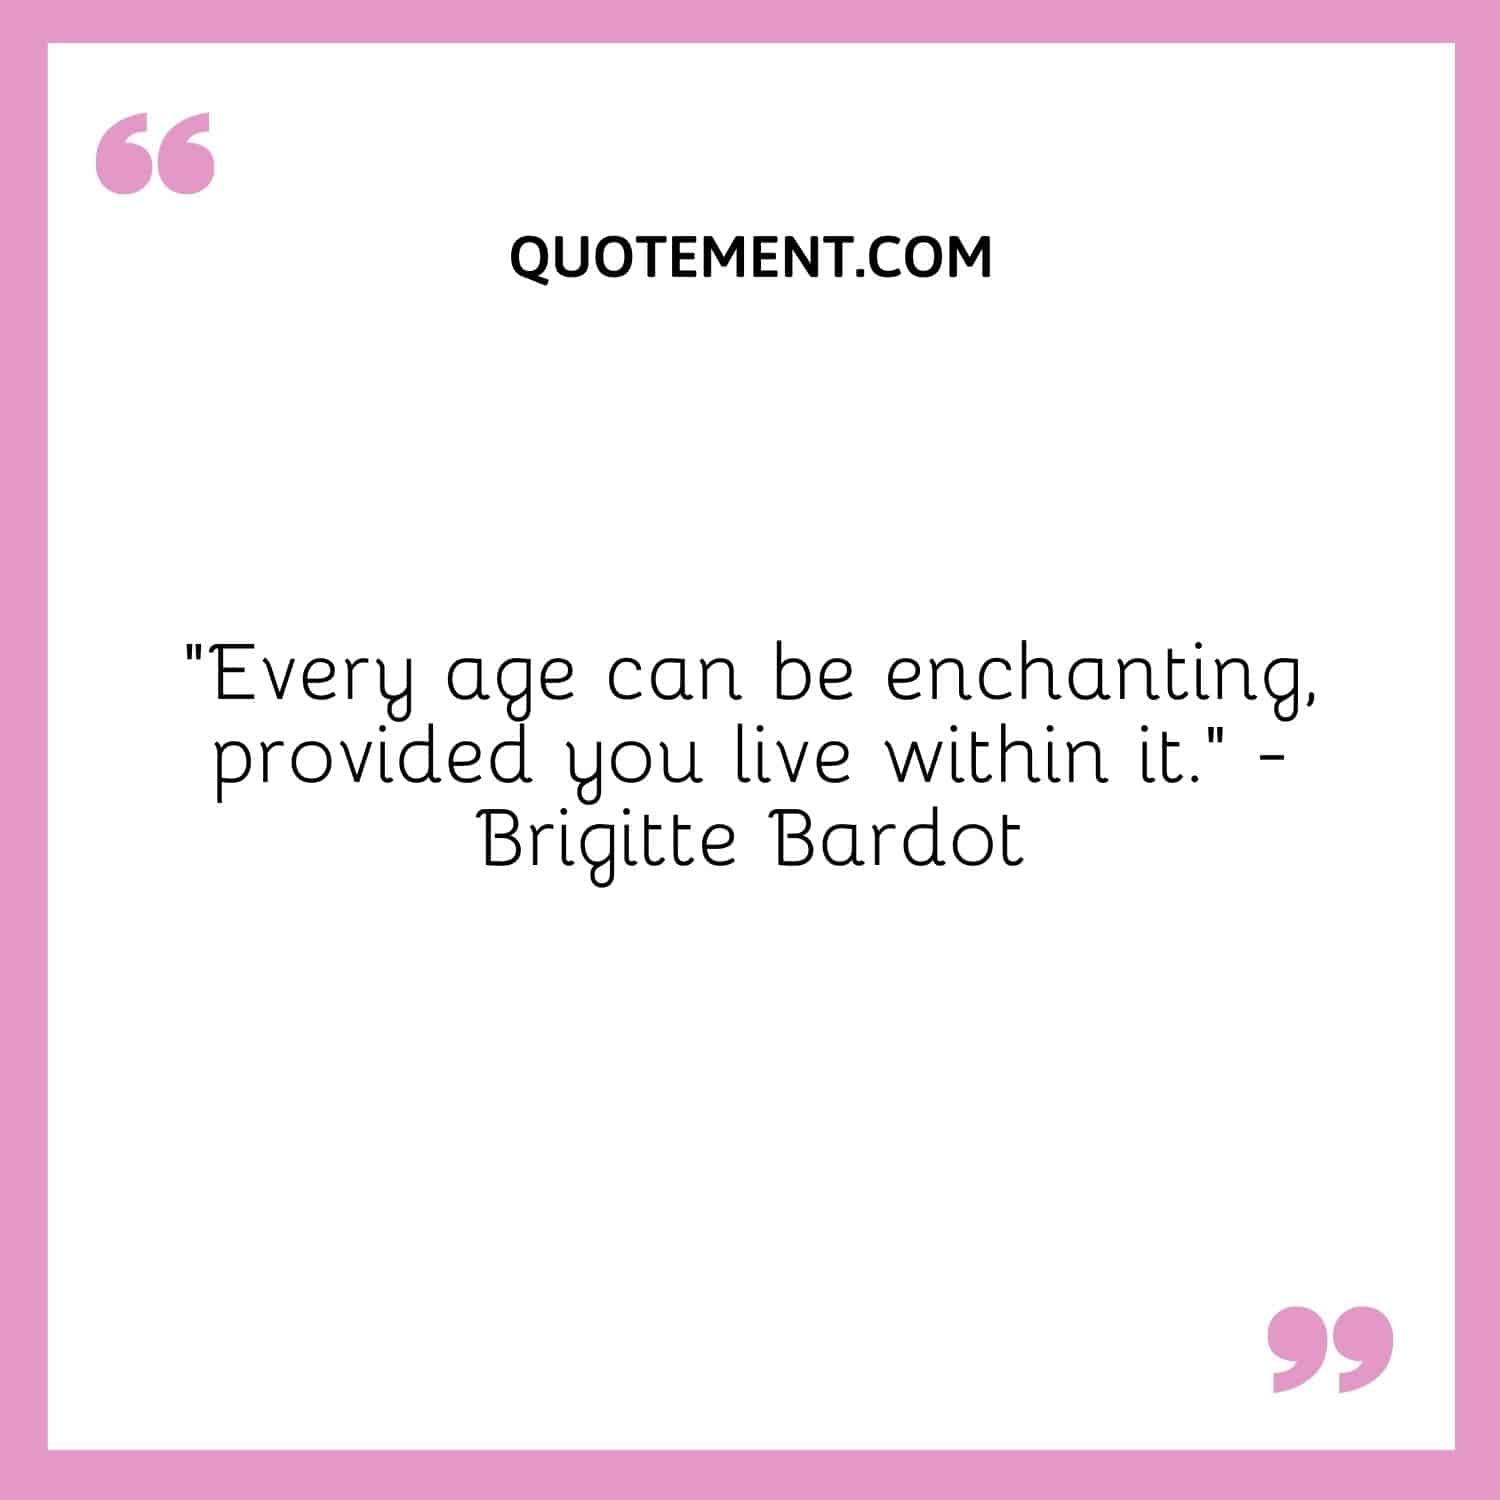 Every age can be enchanting, provided you live within it. — Brigitte Bardot